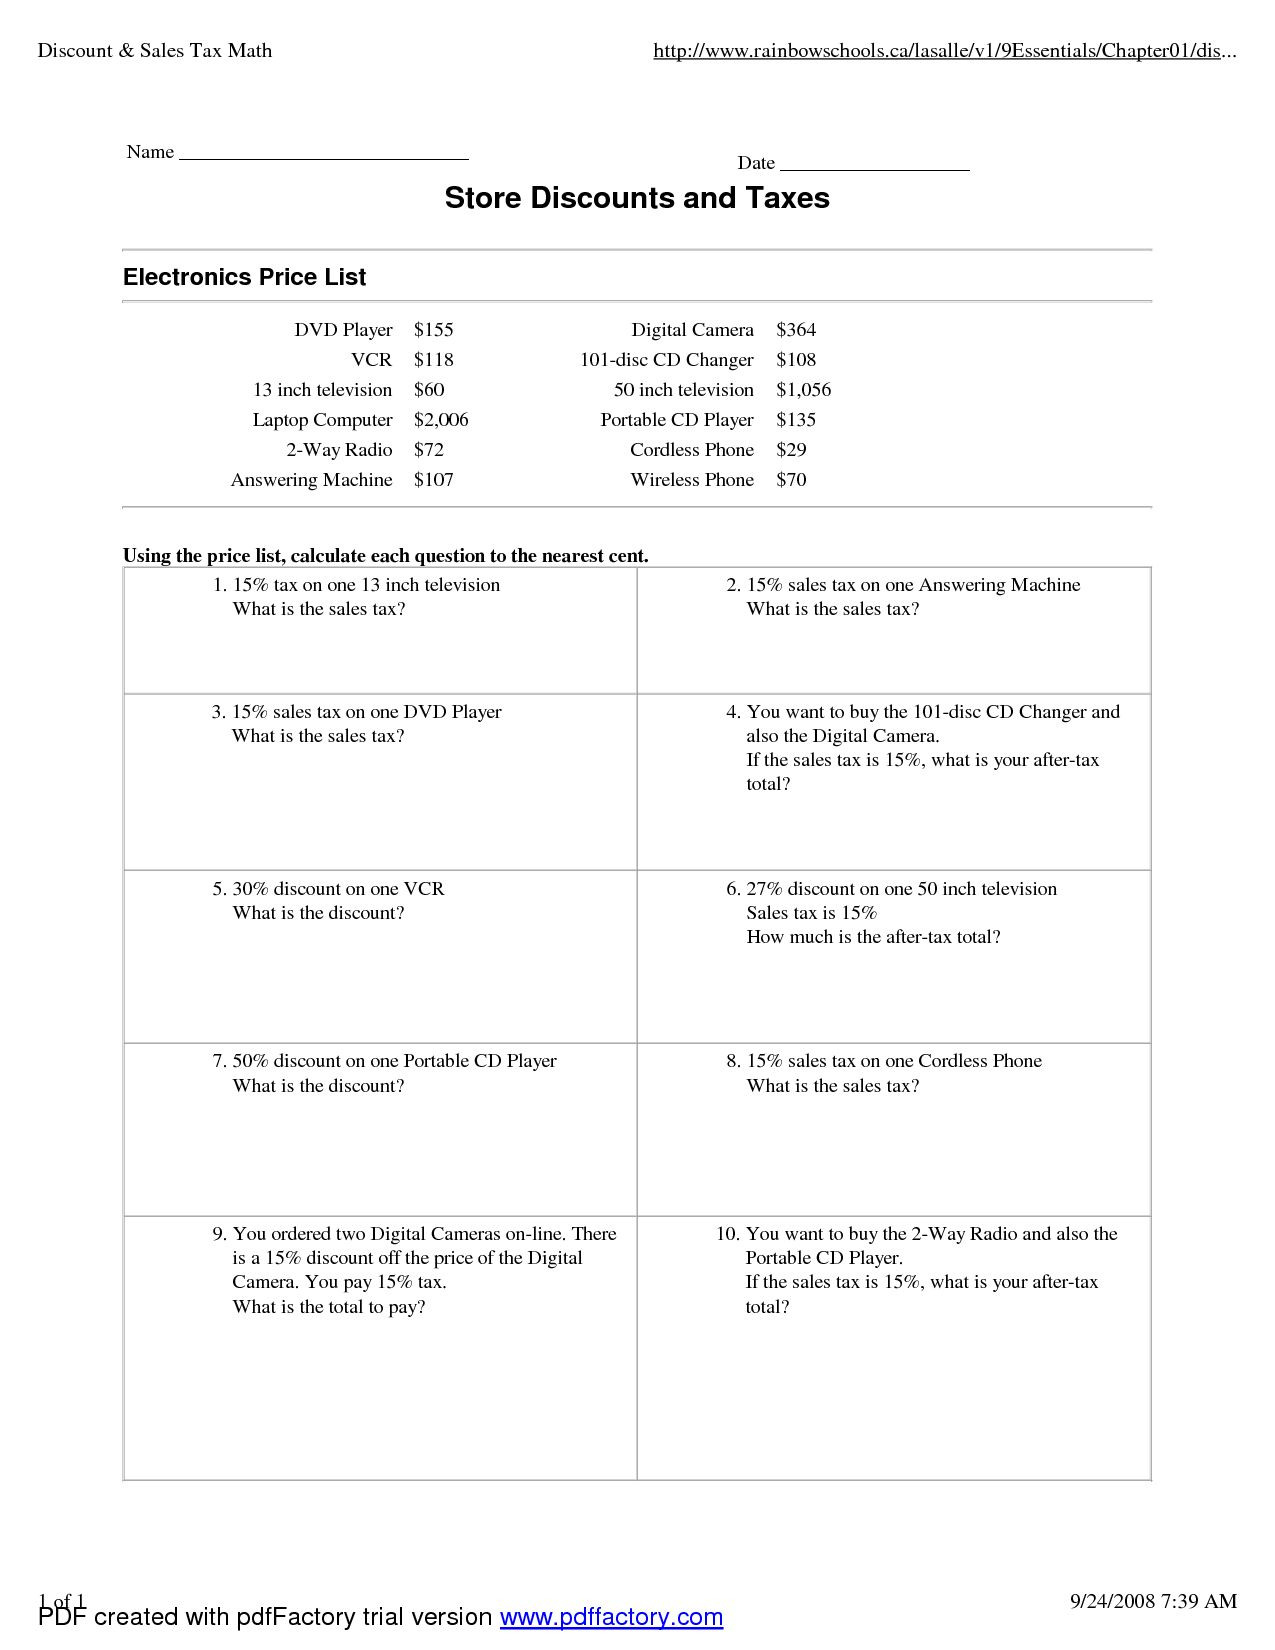 Markups And Markdowns Word Markup And Markdown Worksheet On